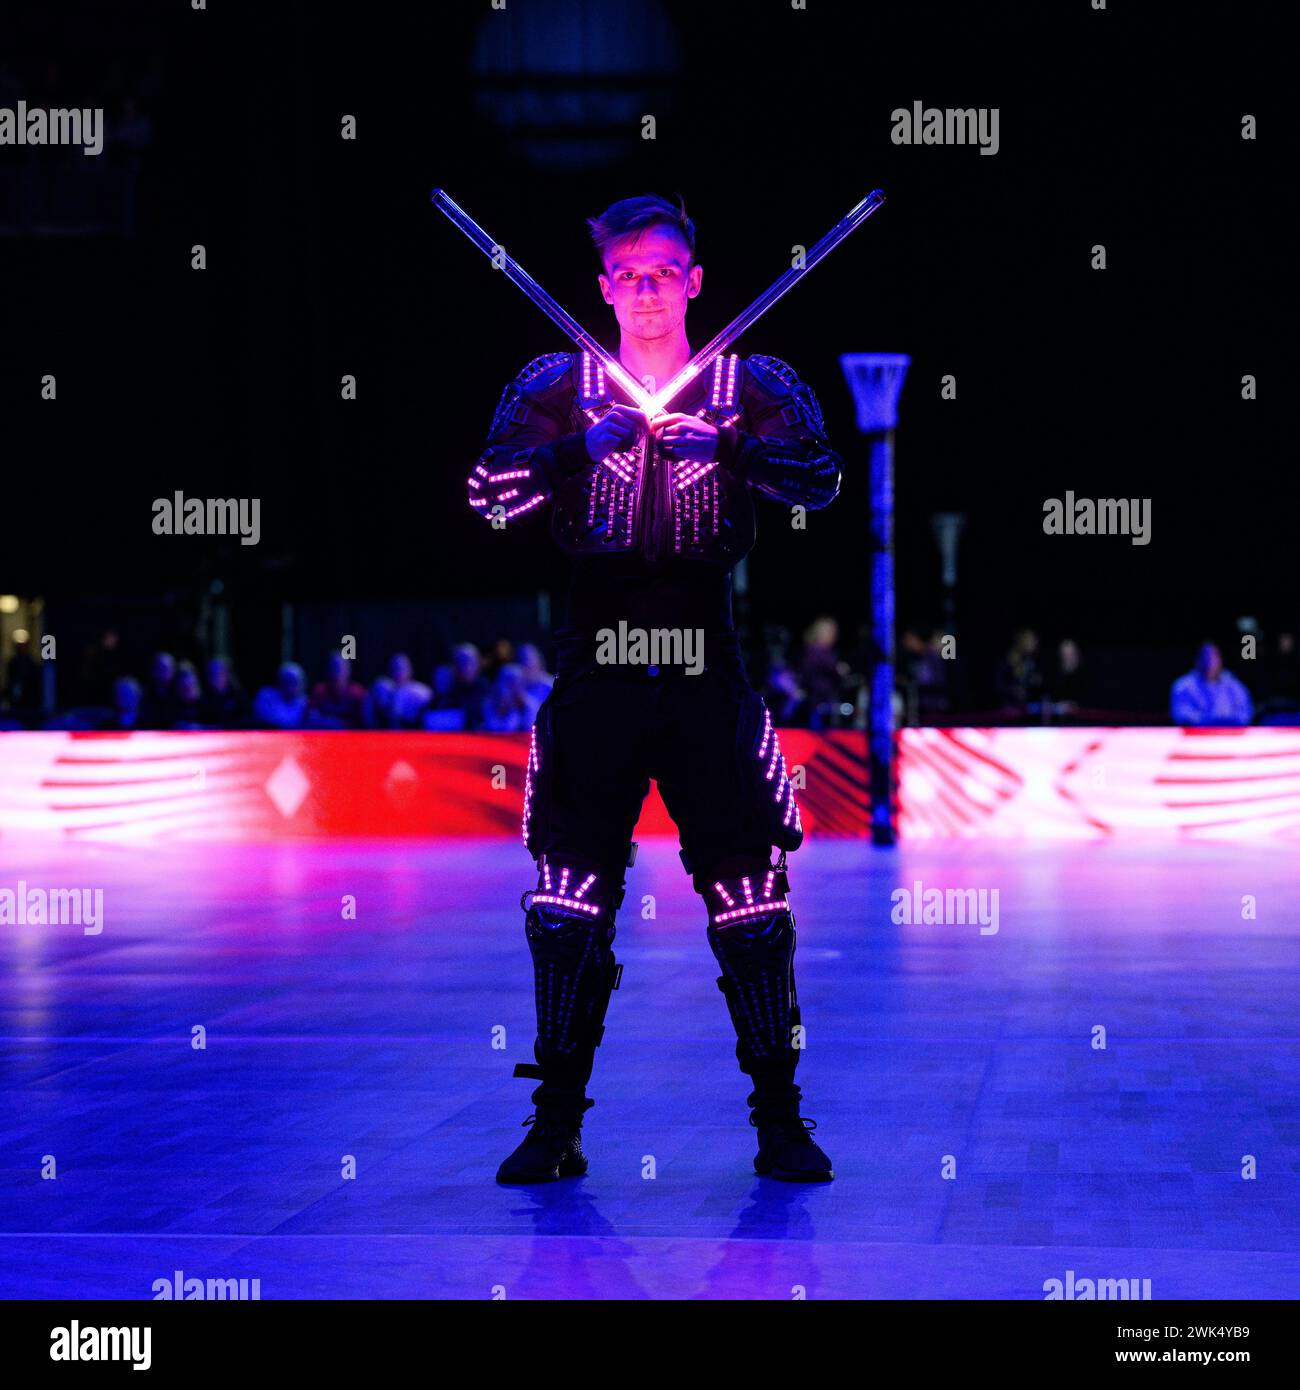 NOTTINGHAM, UNITED KINGDOM. Feb 17, 24. The artist performs light show prior to Strathclyde Sirens v Team Bath during Netball Super League Season Opener 2024 at Motorpoint Arena on Saturday, February 17, 2024, NOTTINGHAM, ENGLAND. Credit: Taka G Wu/Alamy Live News Stock Photo